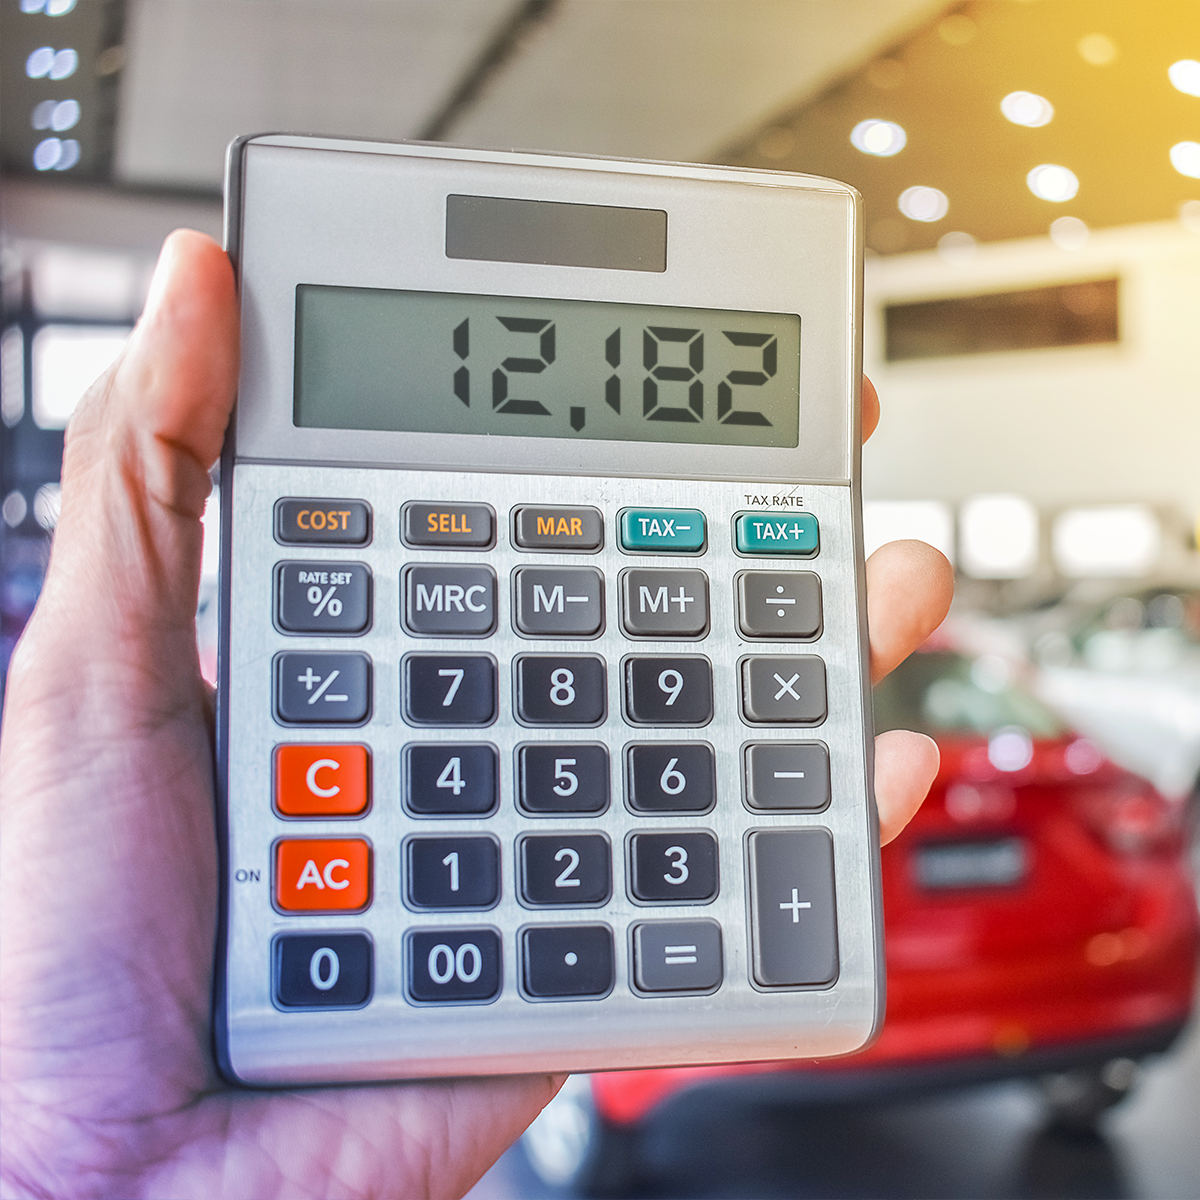 Ownership costs driven by record new vehicle prices and a 90% increase in finance rates